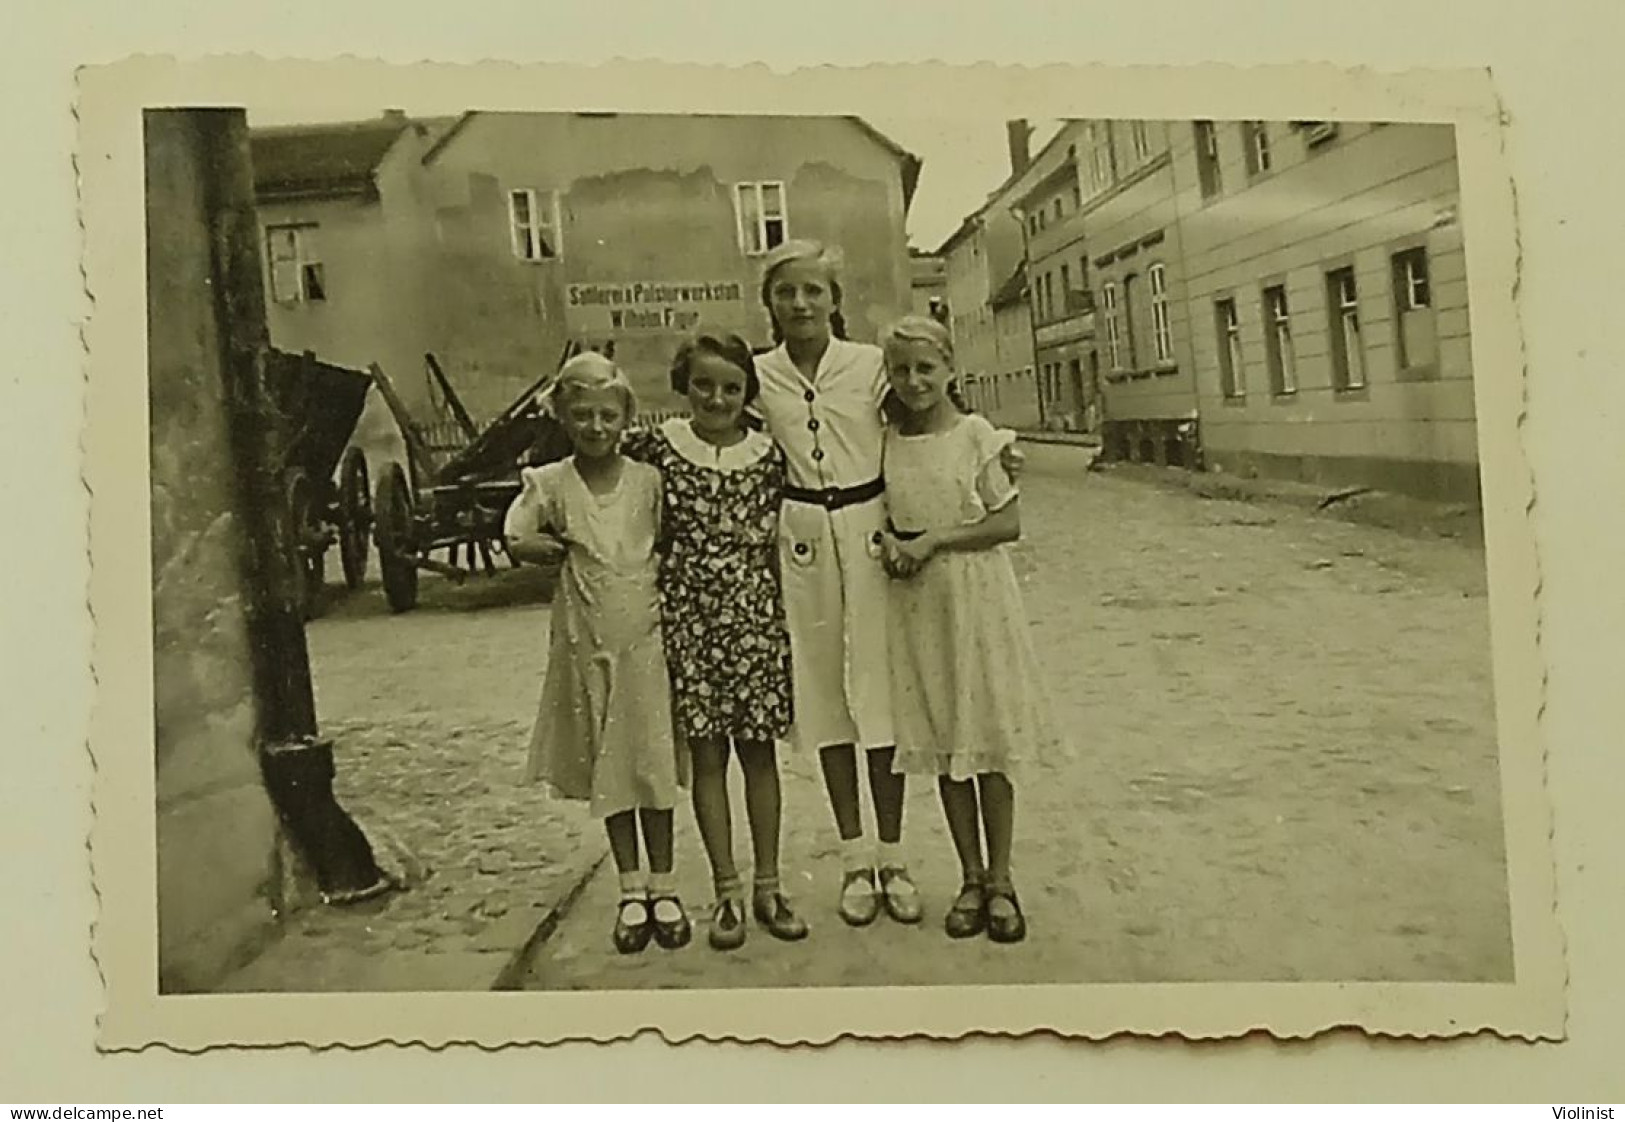 Germany-Four Young Girls Standing On The Street-Photo Gowir,Finsterwalde-old Photo - Lugares